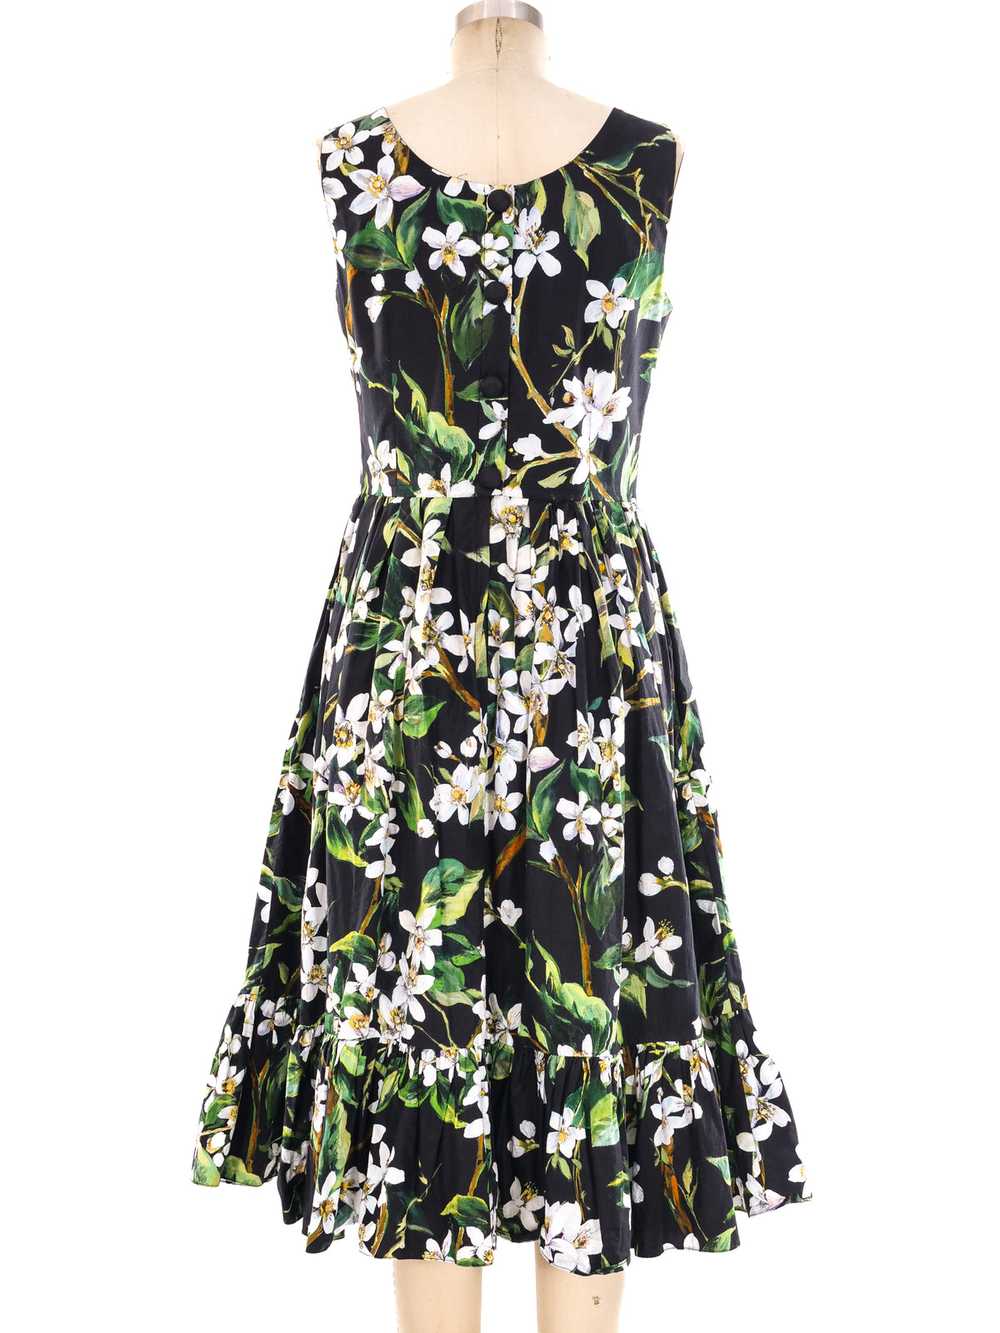 Dolce and Gabbana Floral Printed Tank Dress - image 4